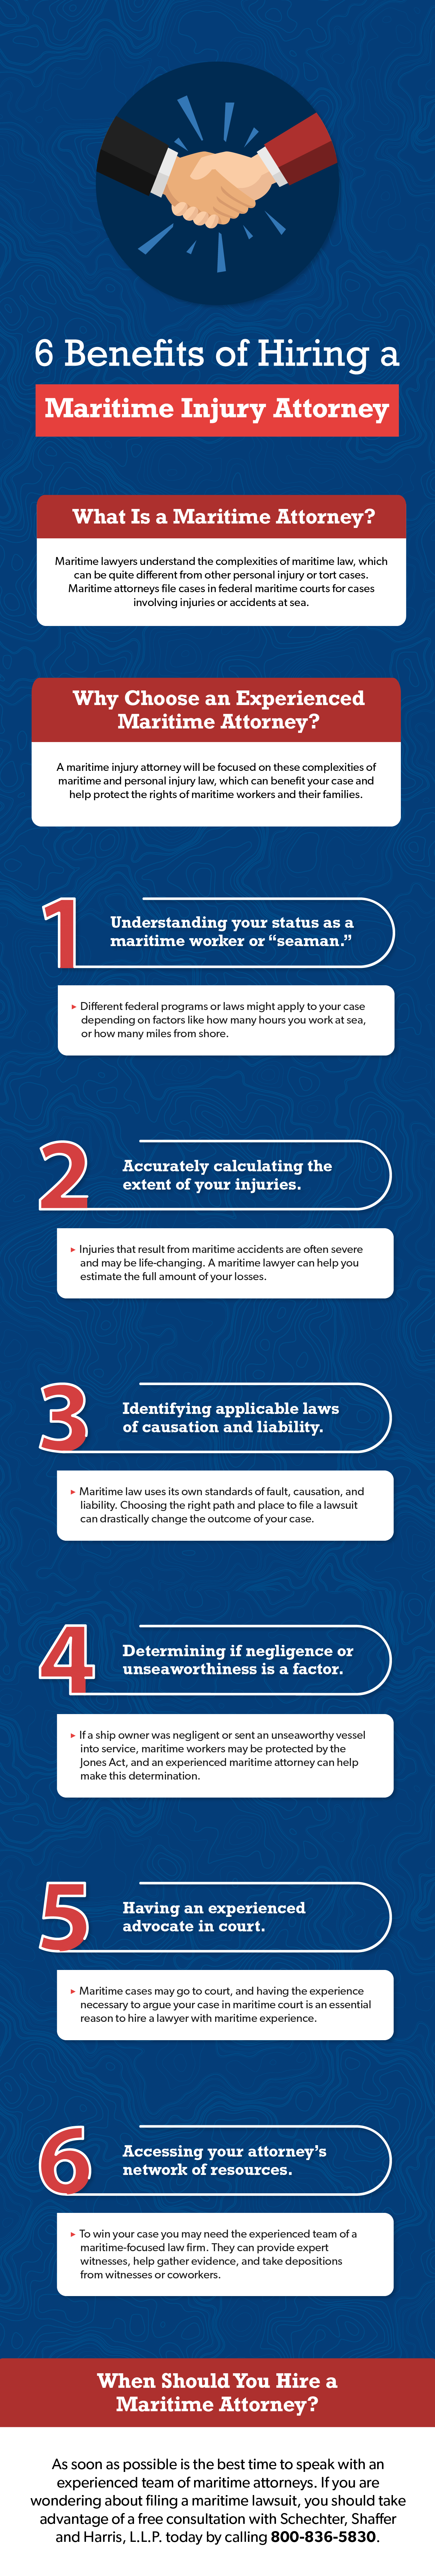 Benefits of Hiring a Maritime Injury Lawyer Infographic